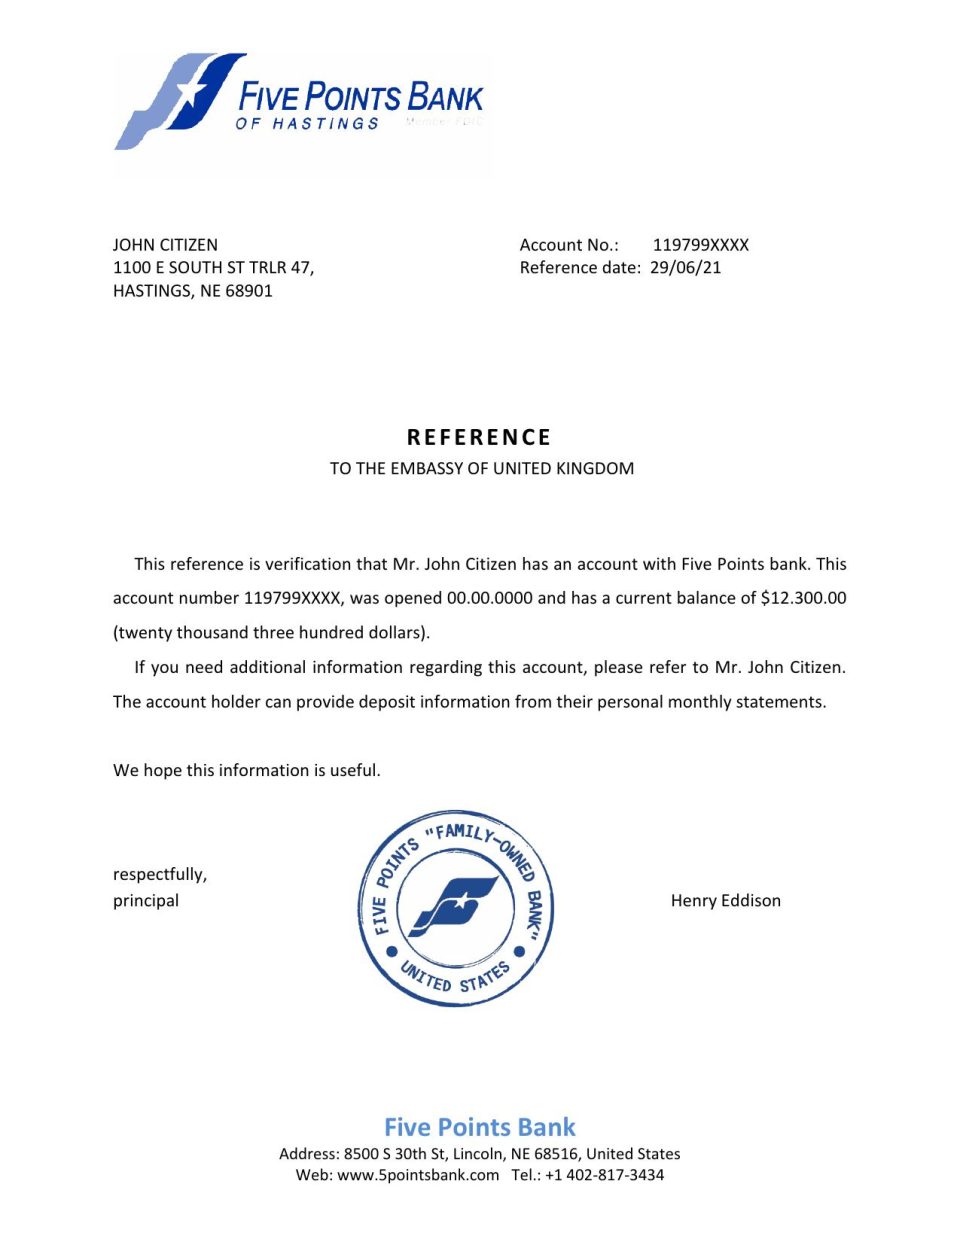 Download USA Five Points Bank Reference Letter Templates | Editable Word